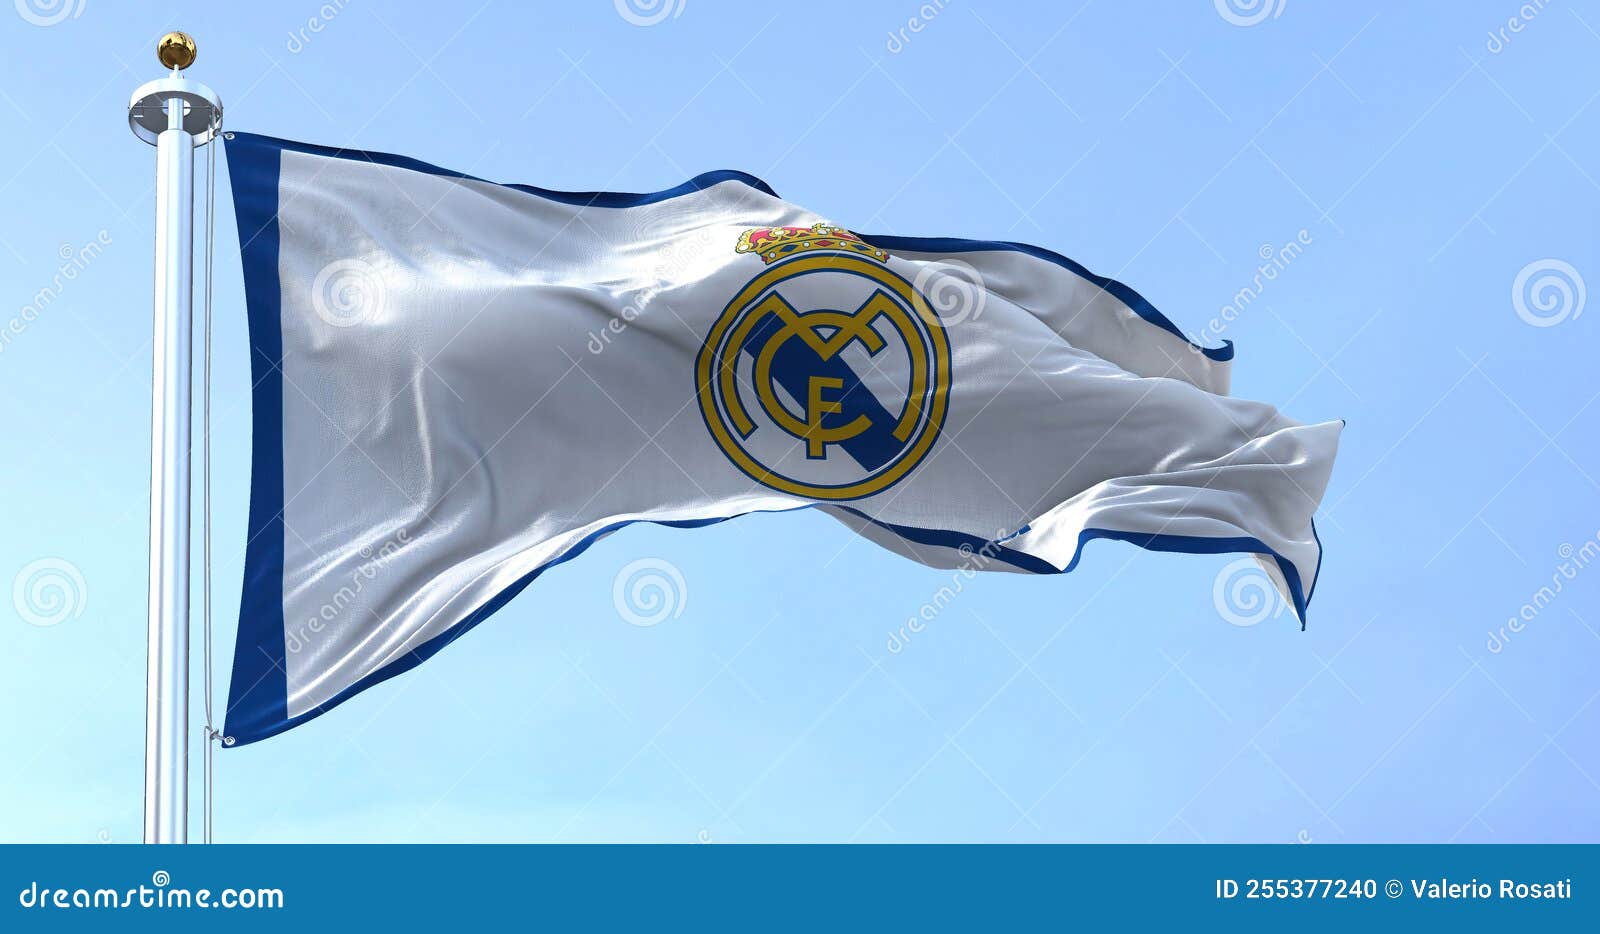 Spain Madrid July 2018 Real Madrid Flag Waving Slow Motion Stock Video  Footage by ©RailwayFX #308573256